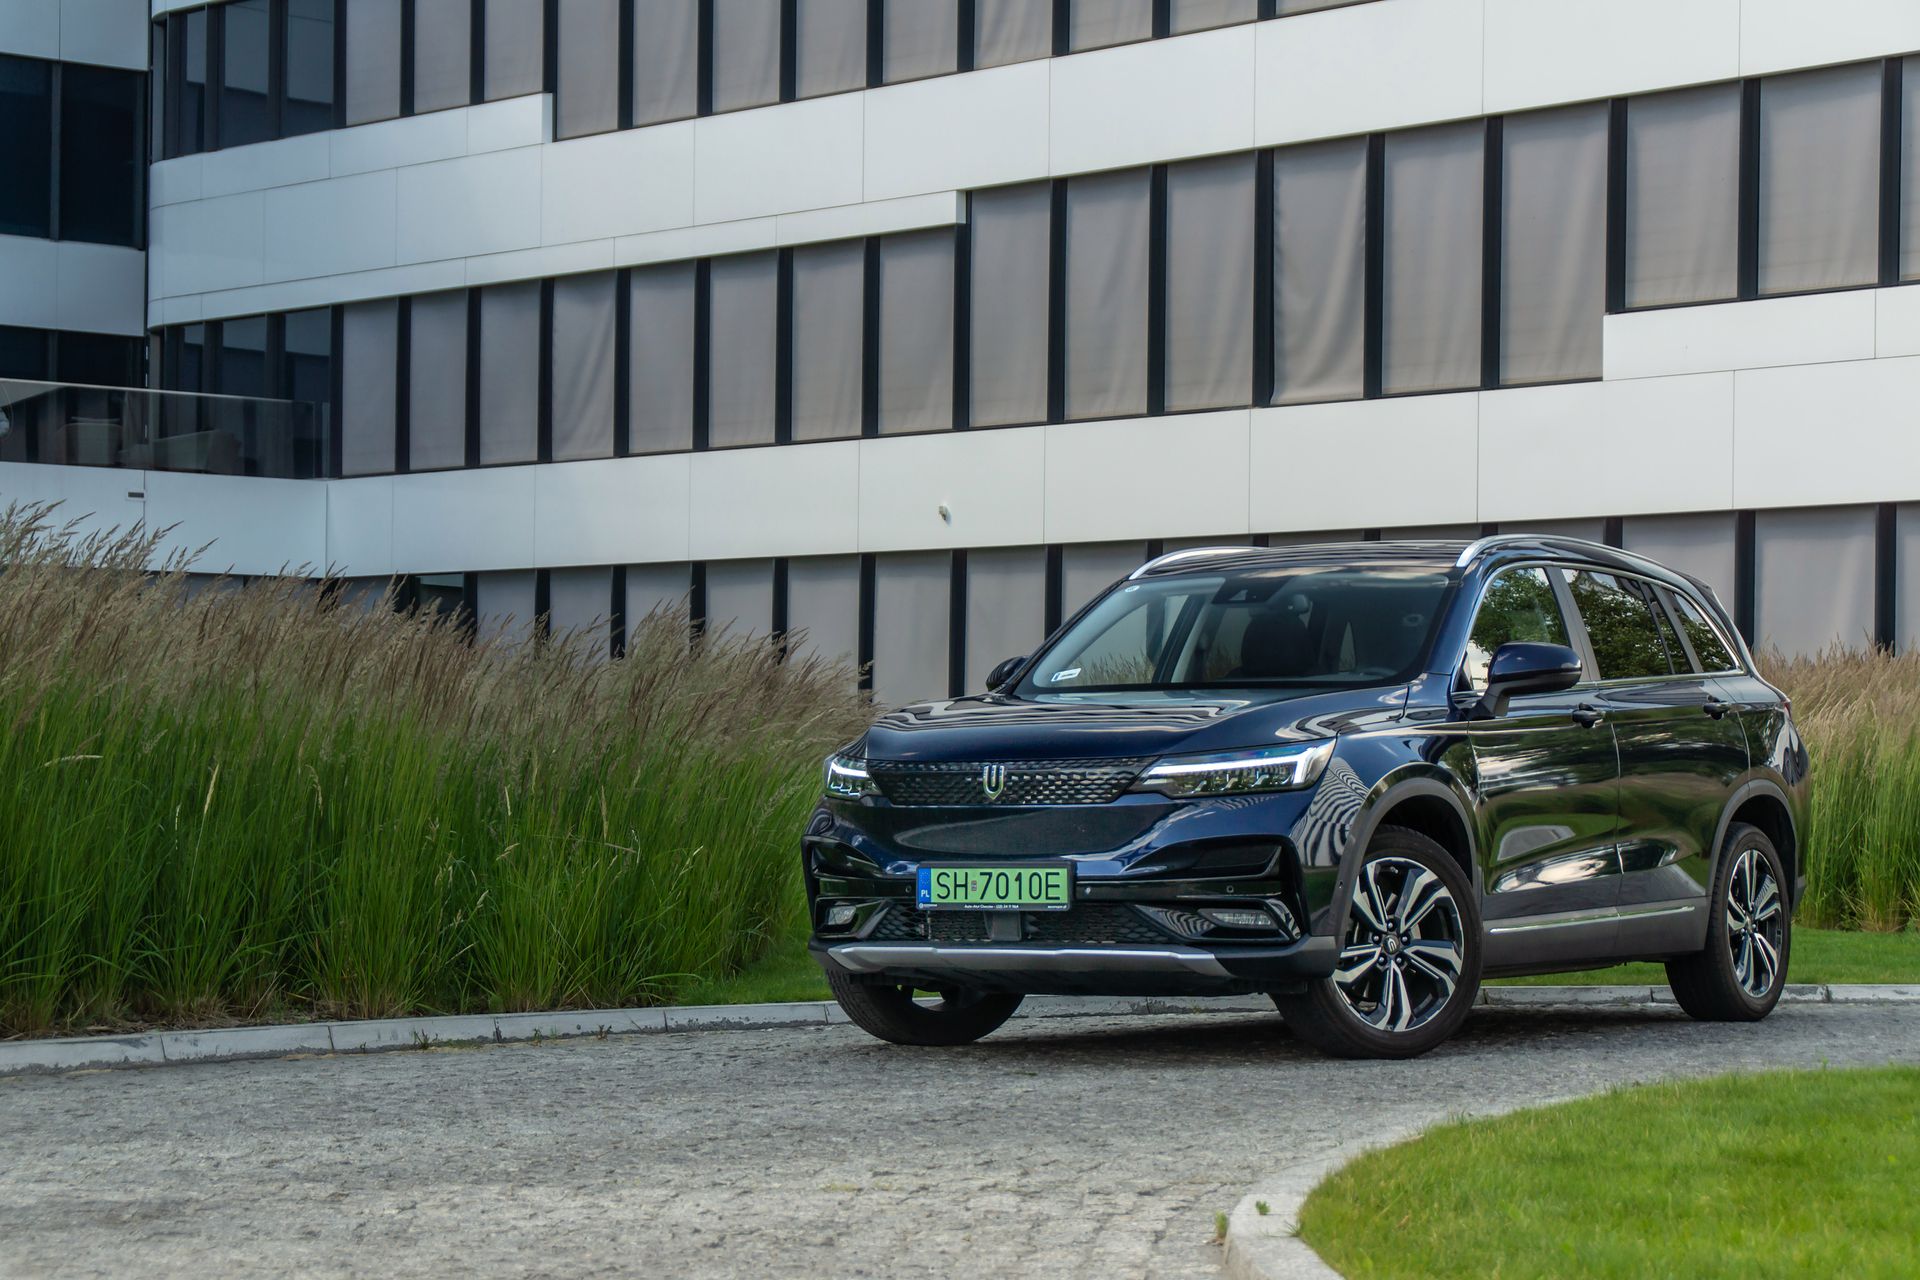 Test: Skywell ET5 - I checked whether the new SUV from China has a chance to break into the European market